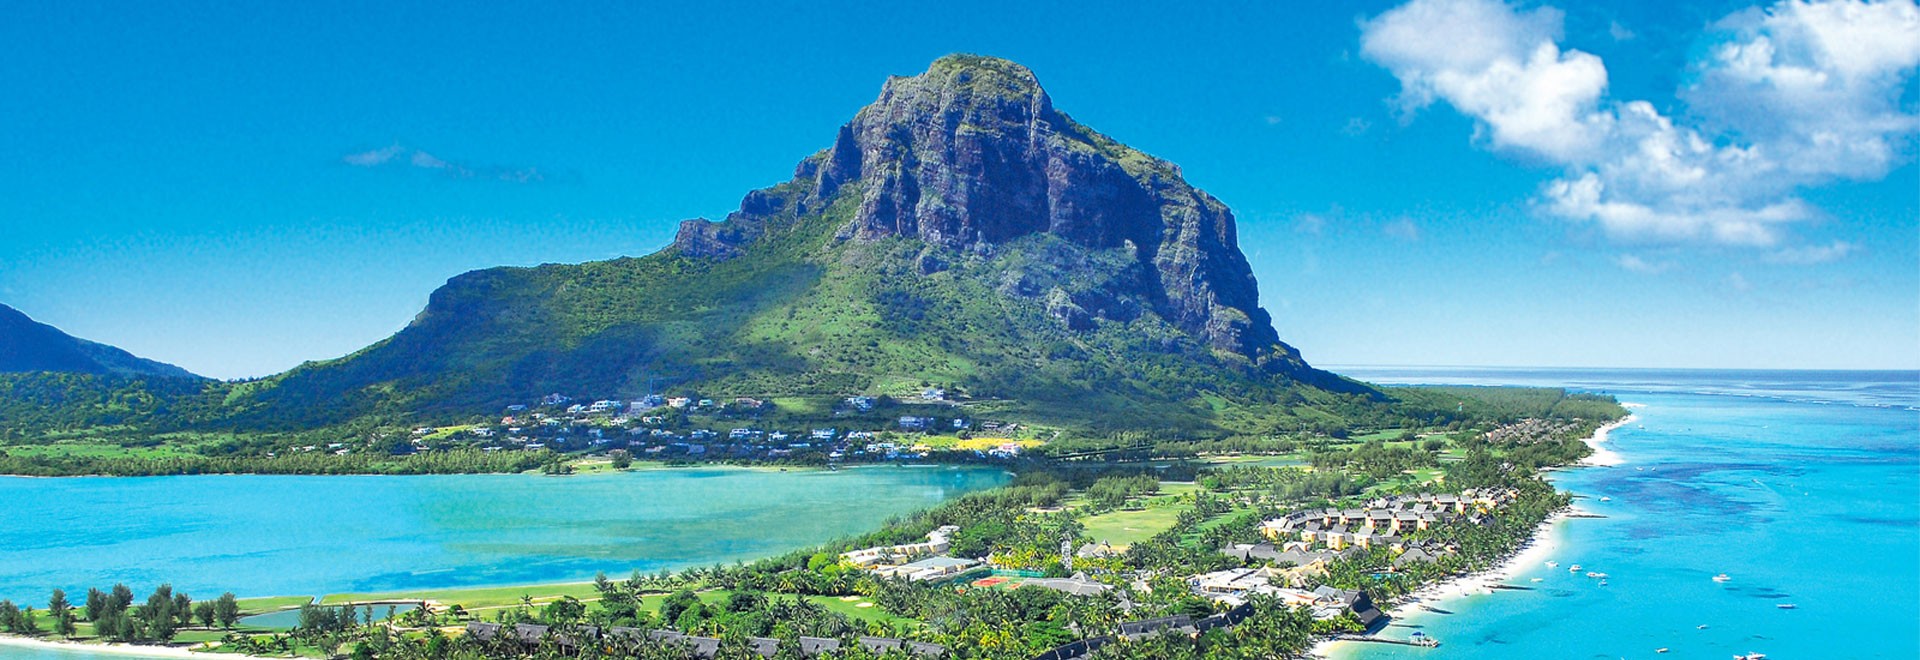 Tennis Vacations and Holidays in Mauritius - Book tennis resorts and tennis camps in Mauritius